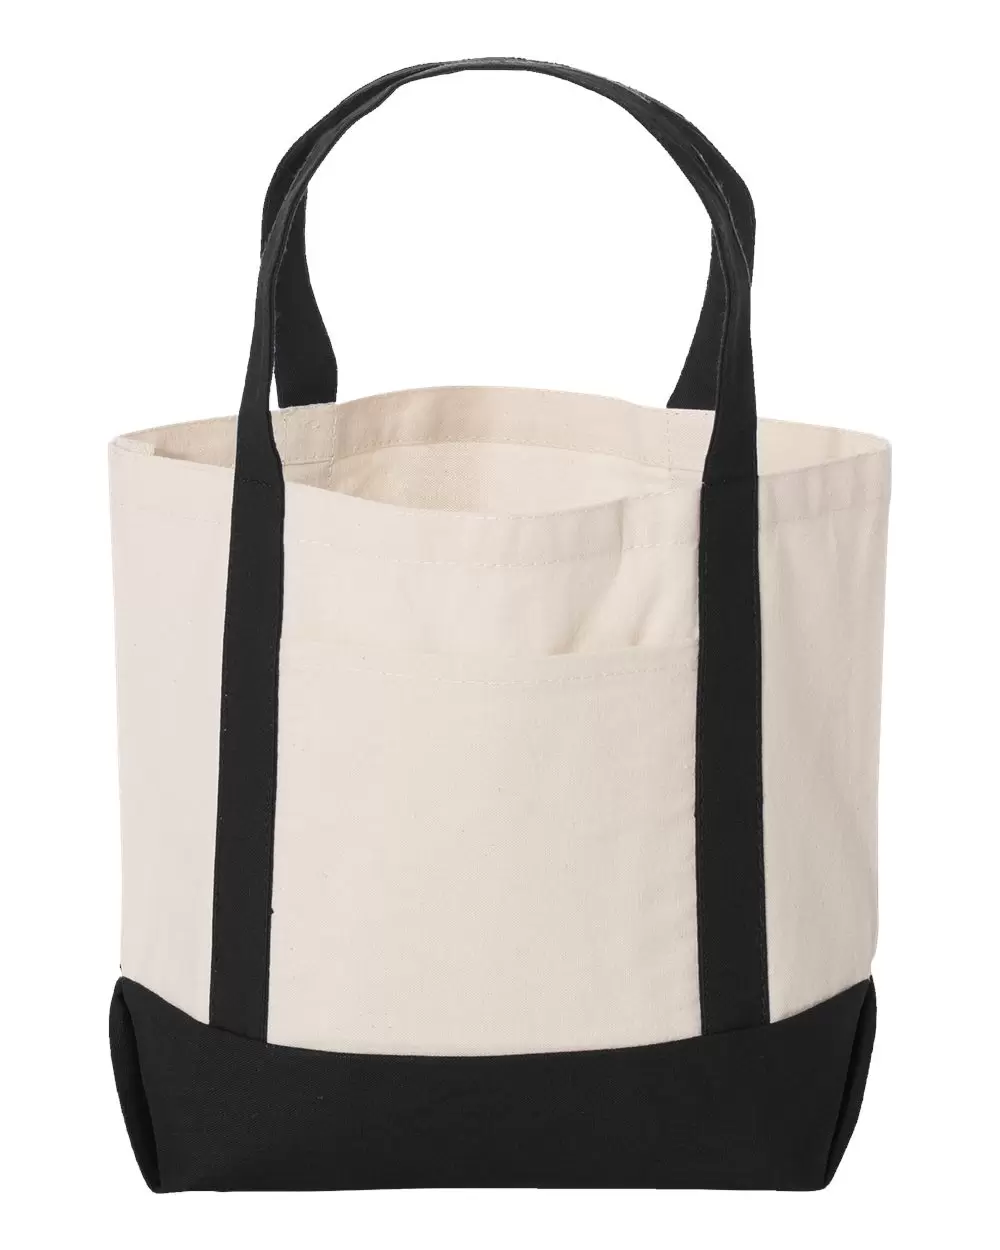 Wholesale Native Cotton Canvas Tote Bag | Tote Bags | Order Blank